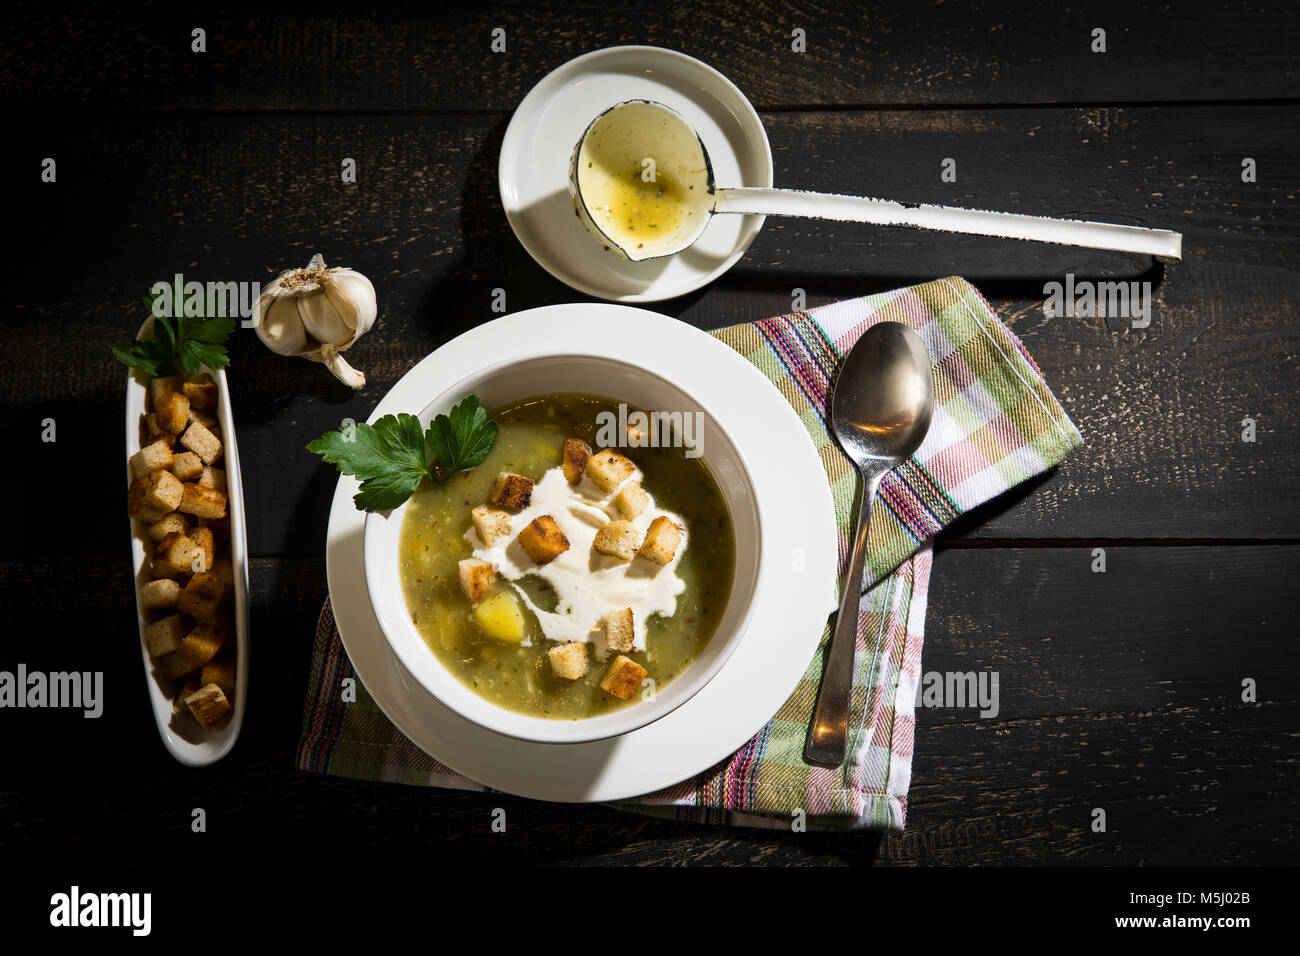 Garlic cream soup with croutons Stock Photo